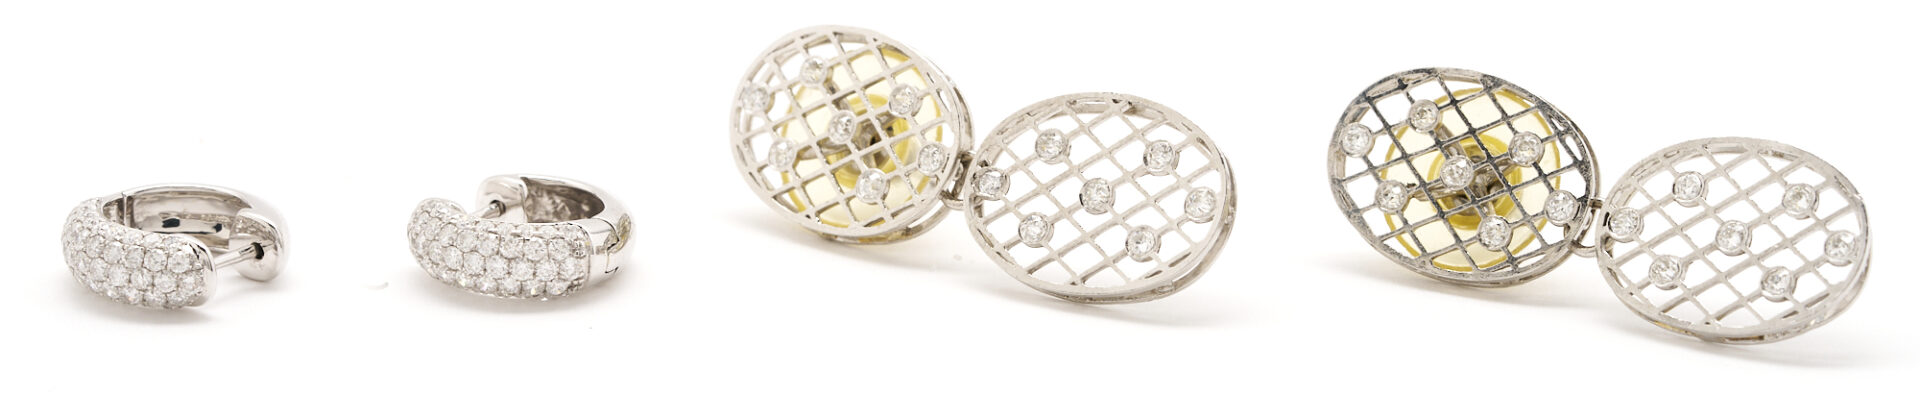 Lot 685: 2 Pairs of Platinum or Gold & Diamond Earrings